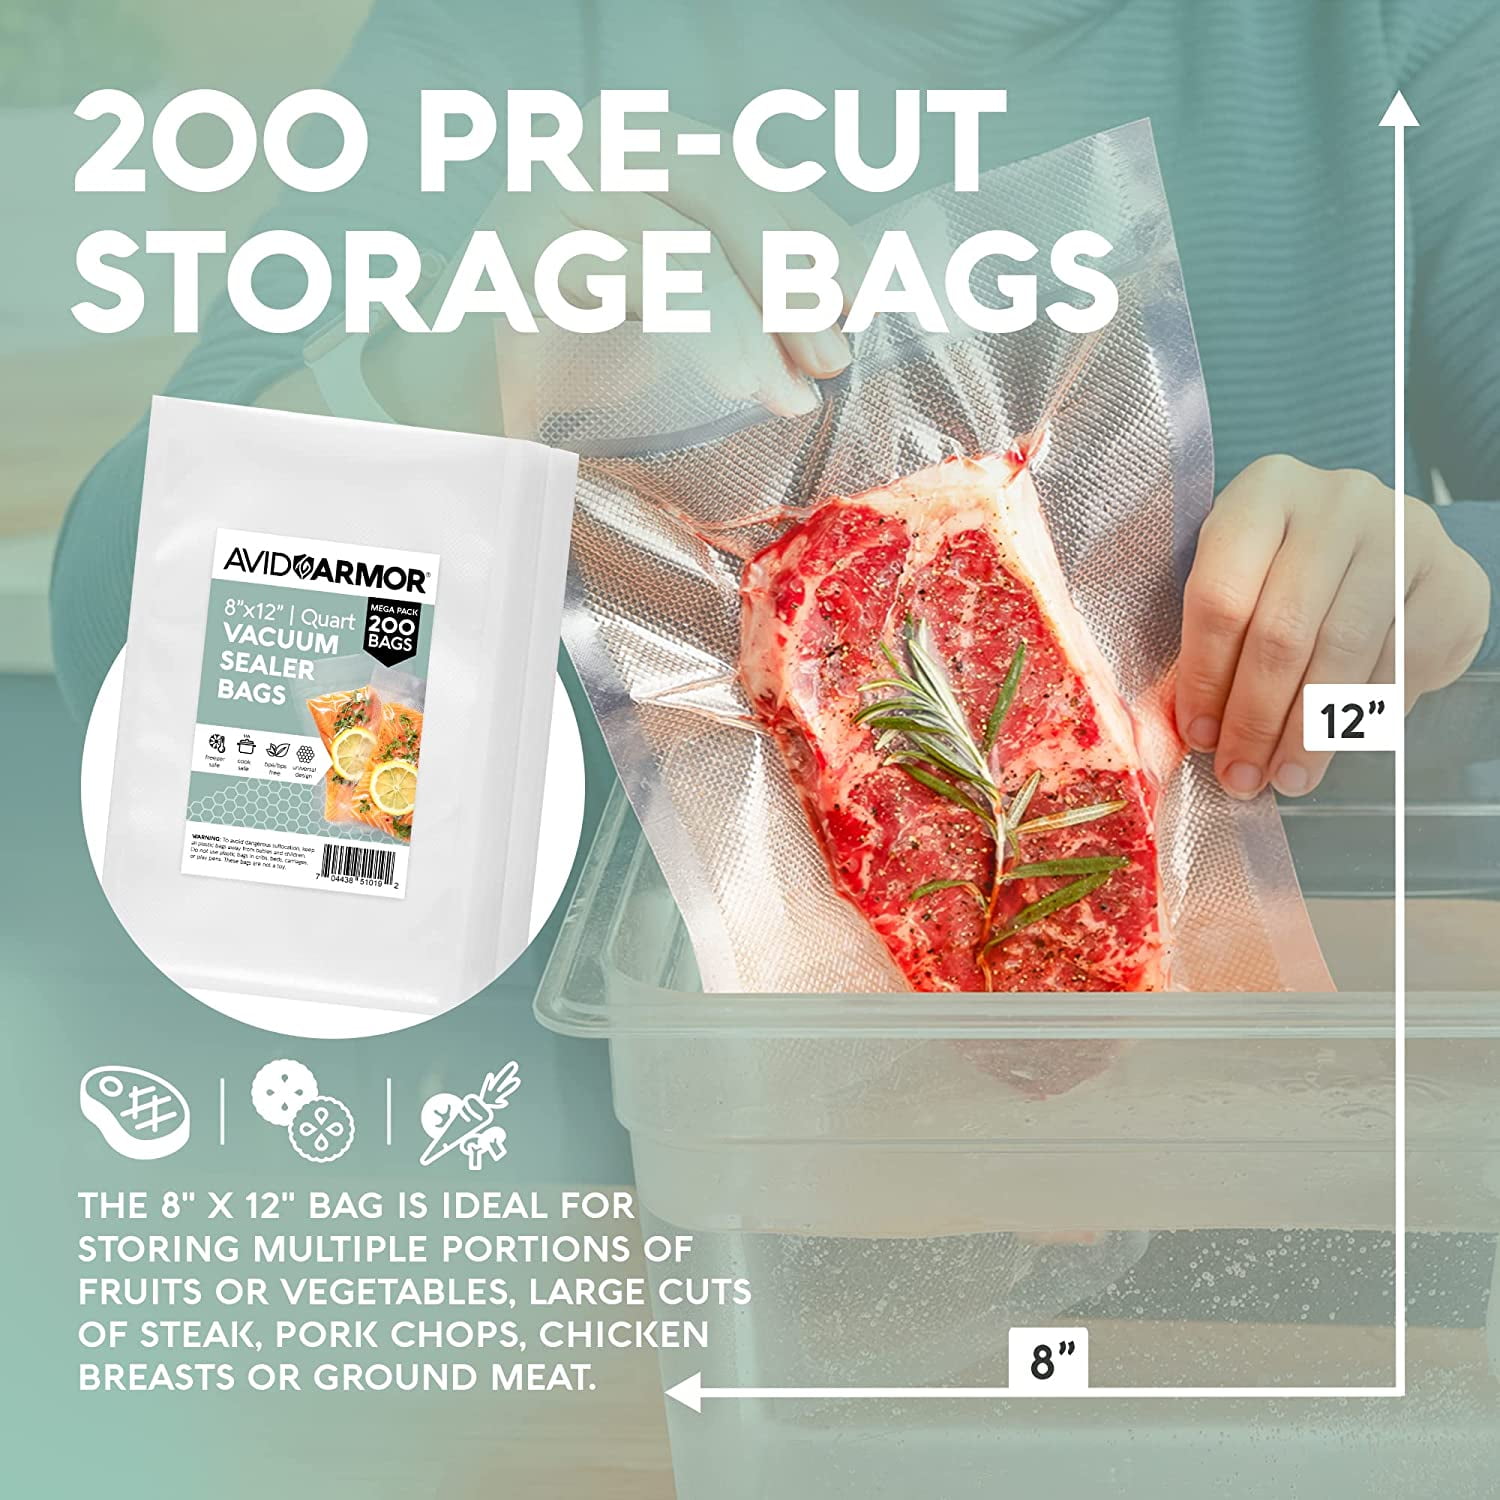 Vacuum Food Storage Bags Gallon Size Pre-Cut (11x16) from Avid Armor